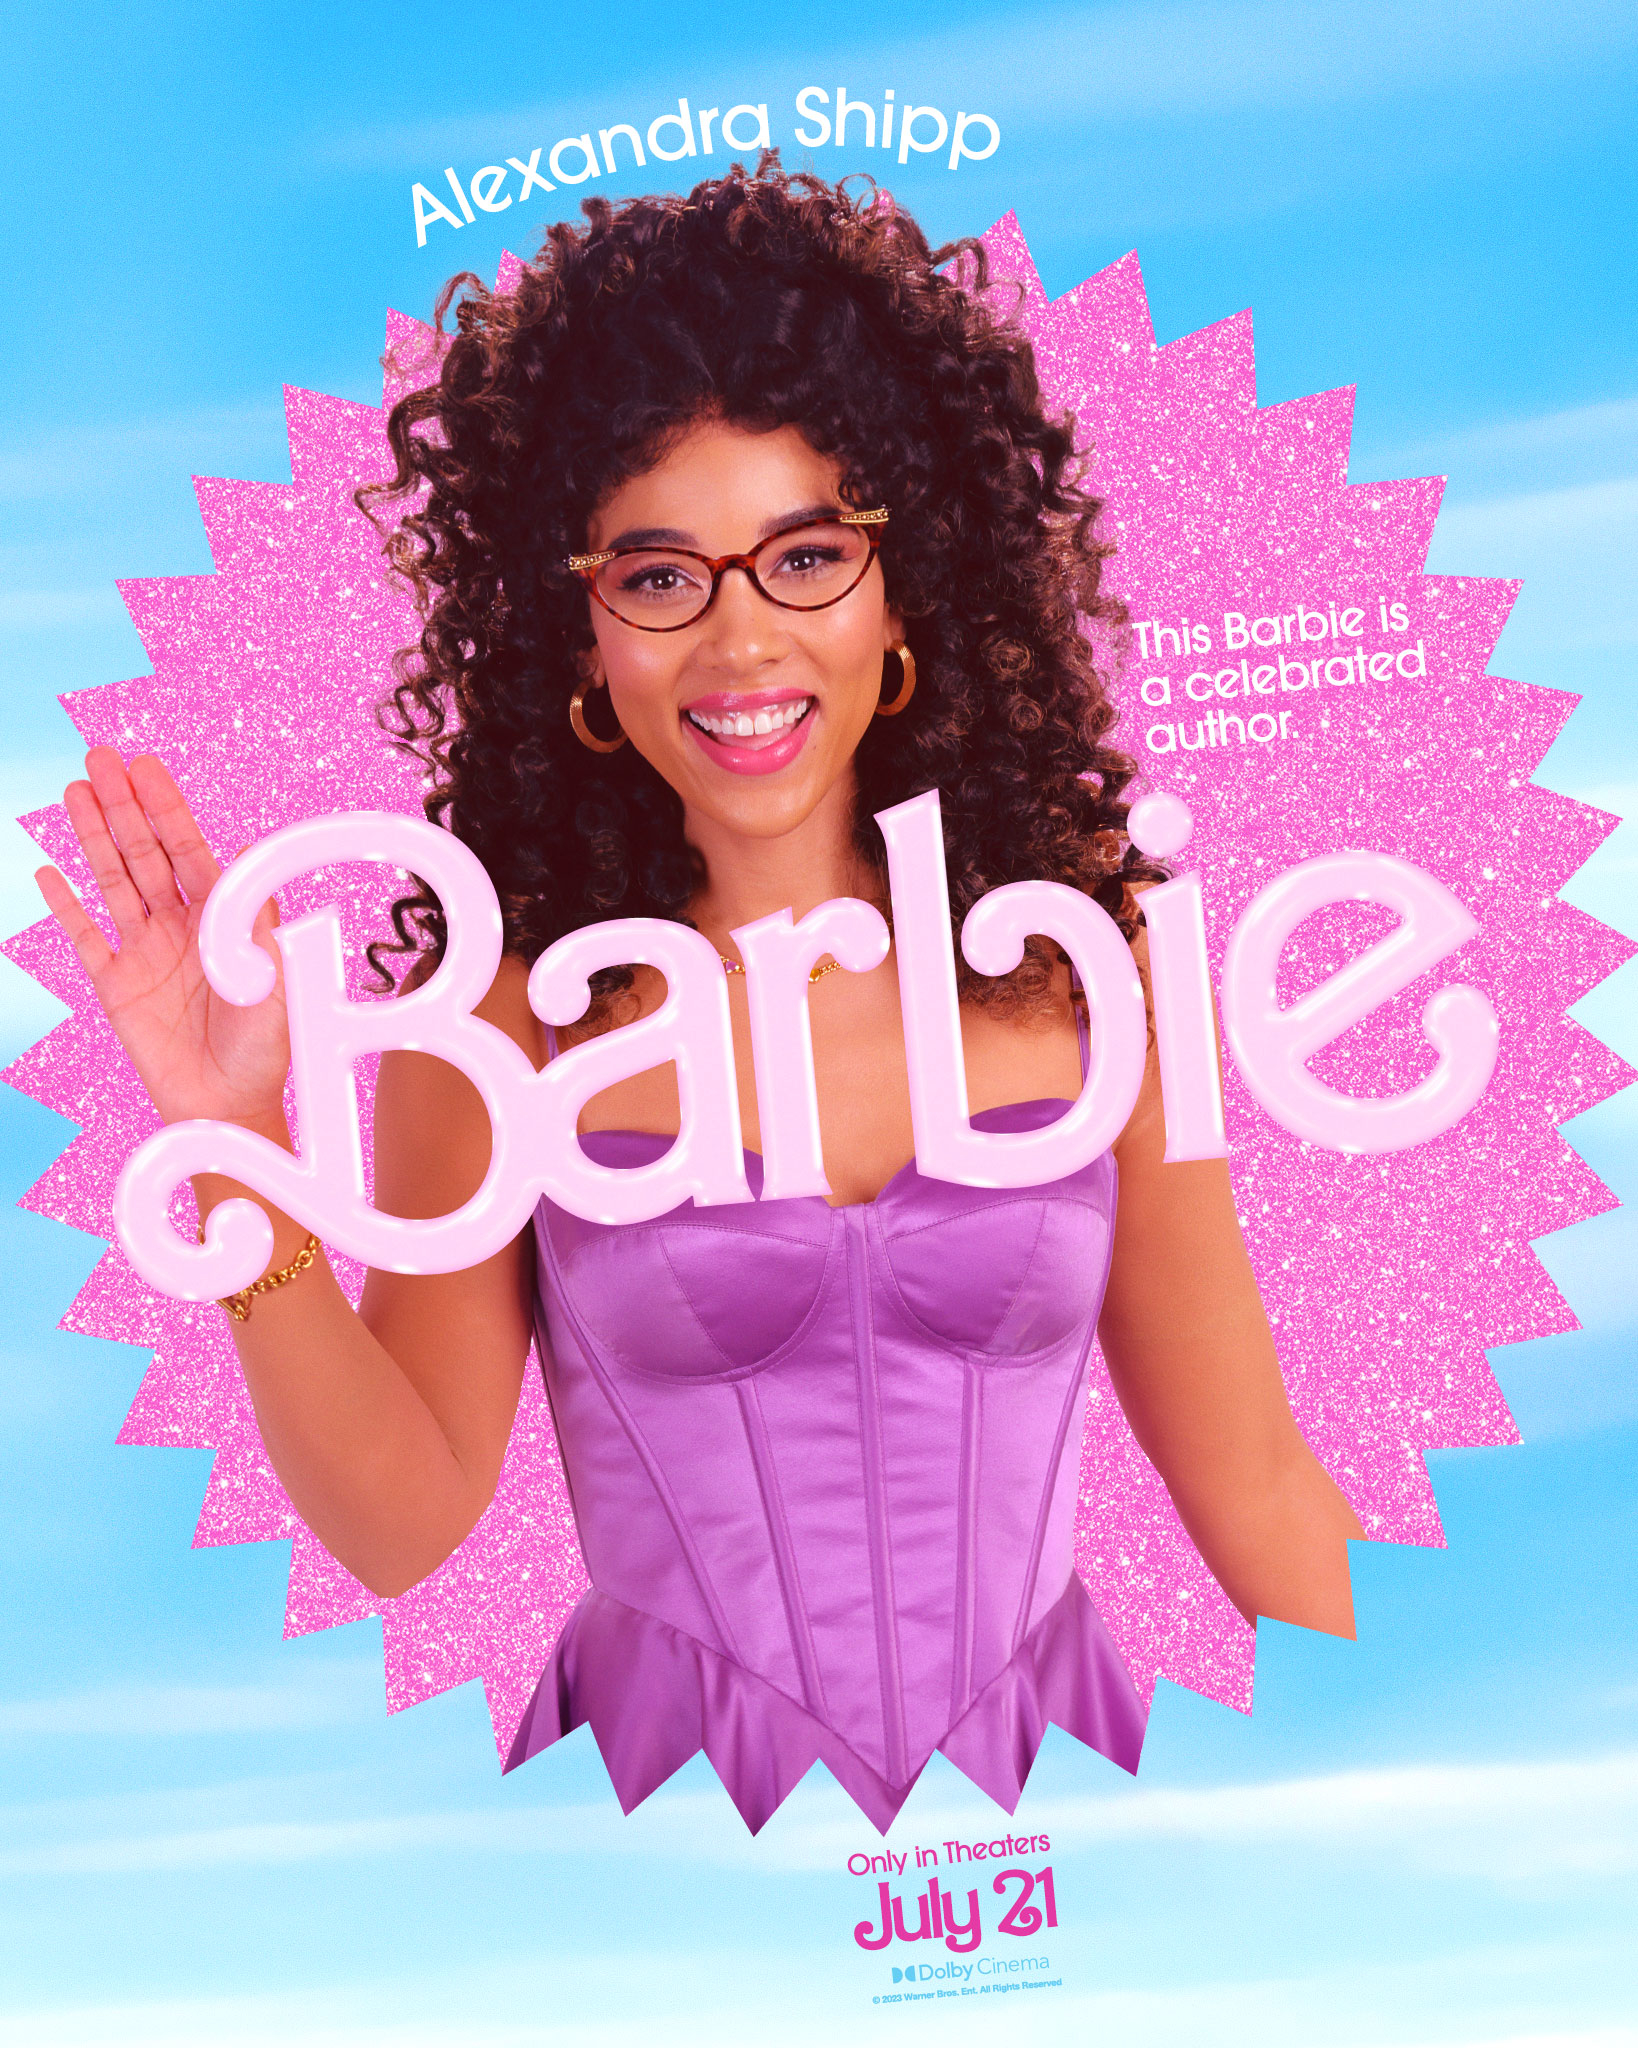 alexandra&#x27;s movie poster which shows Alexandra waving. The poster says, &quot;This Barbie is a celebrated author&quot;